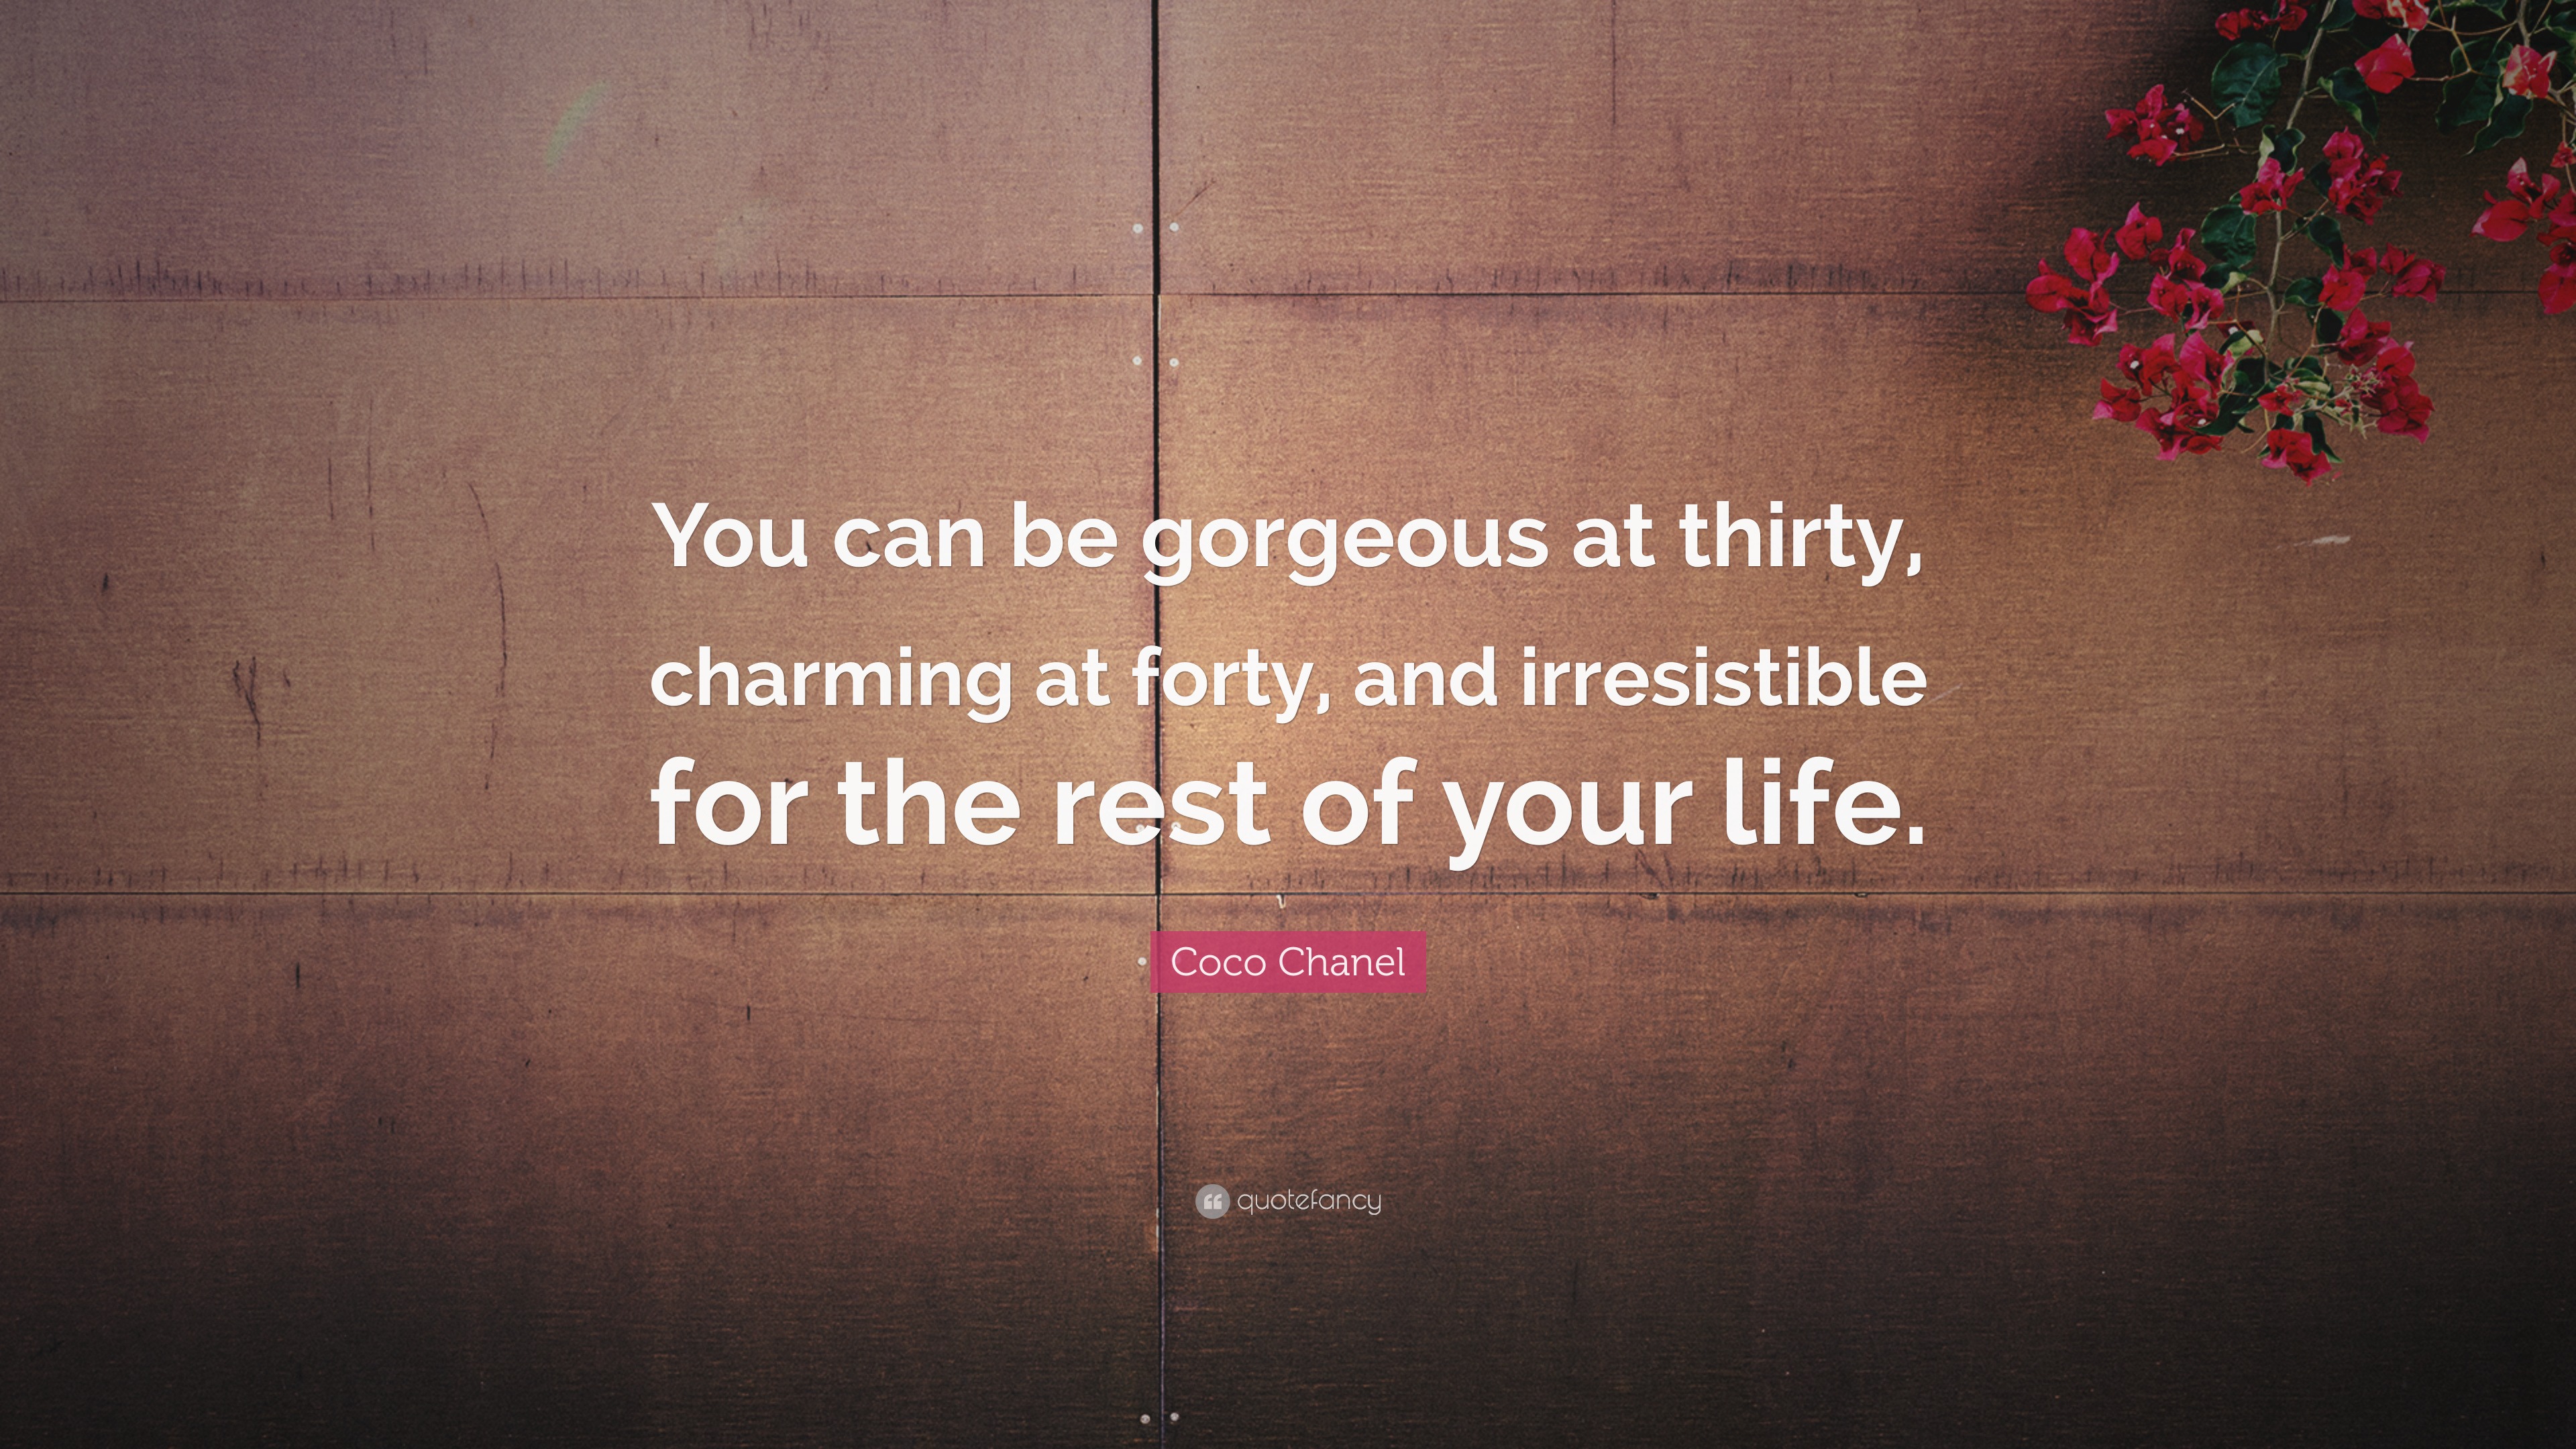 Coco Chanel Quote: can be gorgeous at thirty, charming at forty, and for the